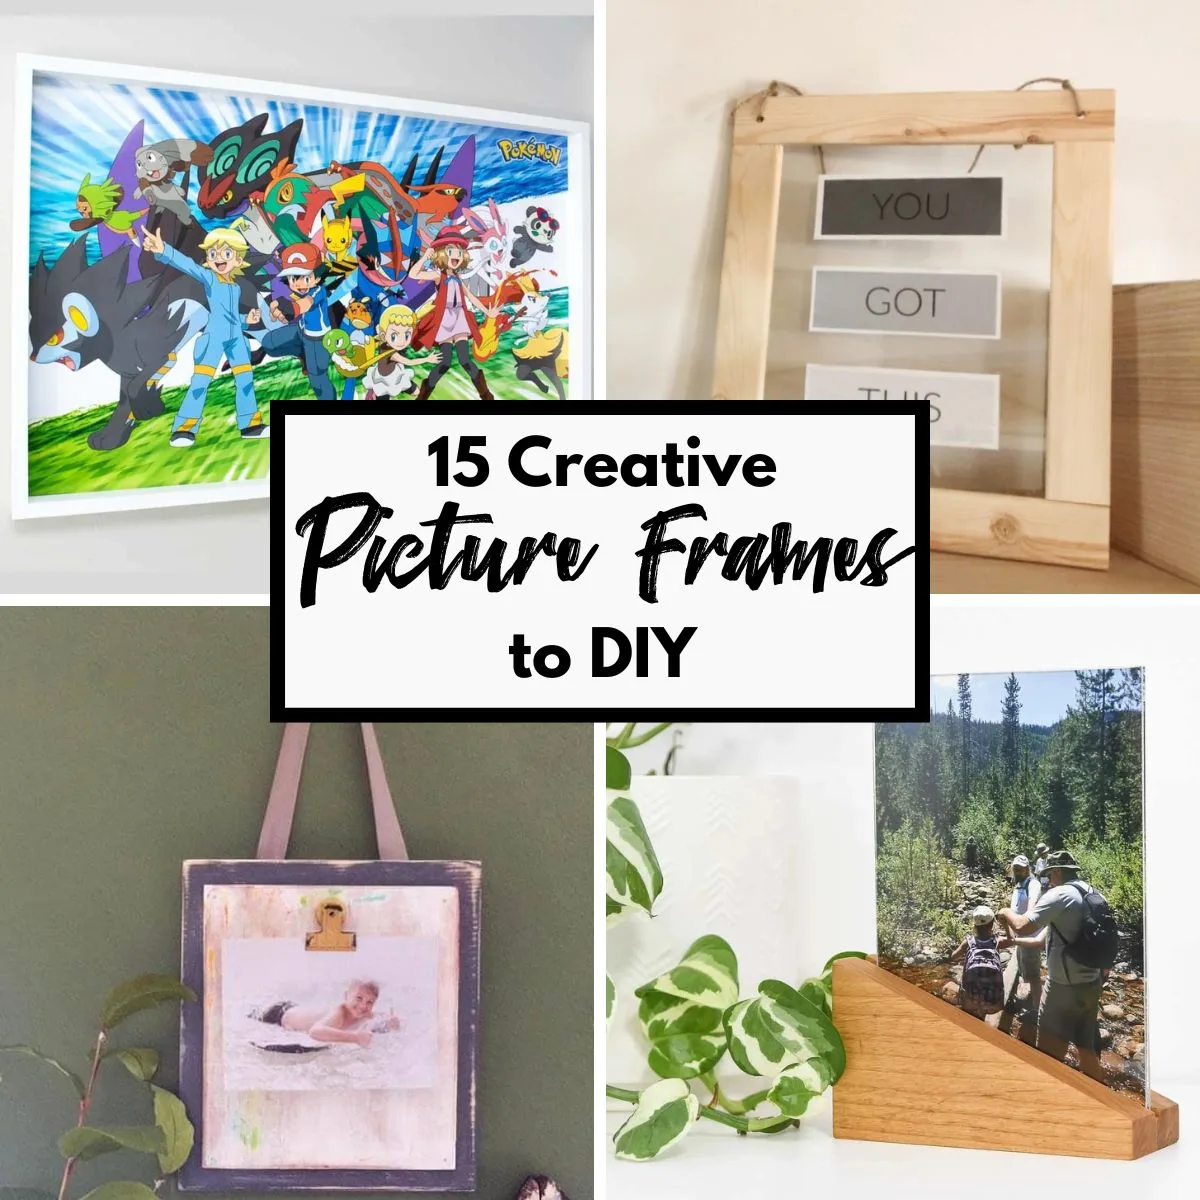 DIY picture frame ideas